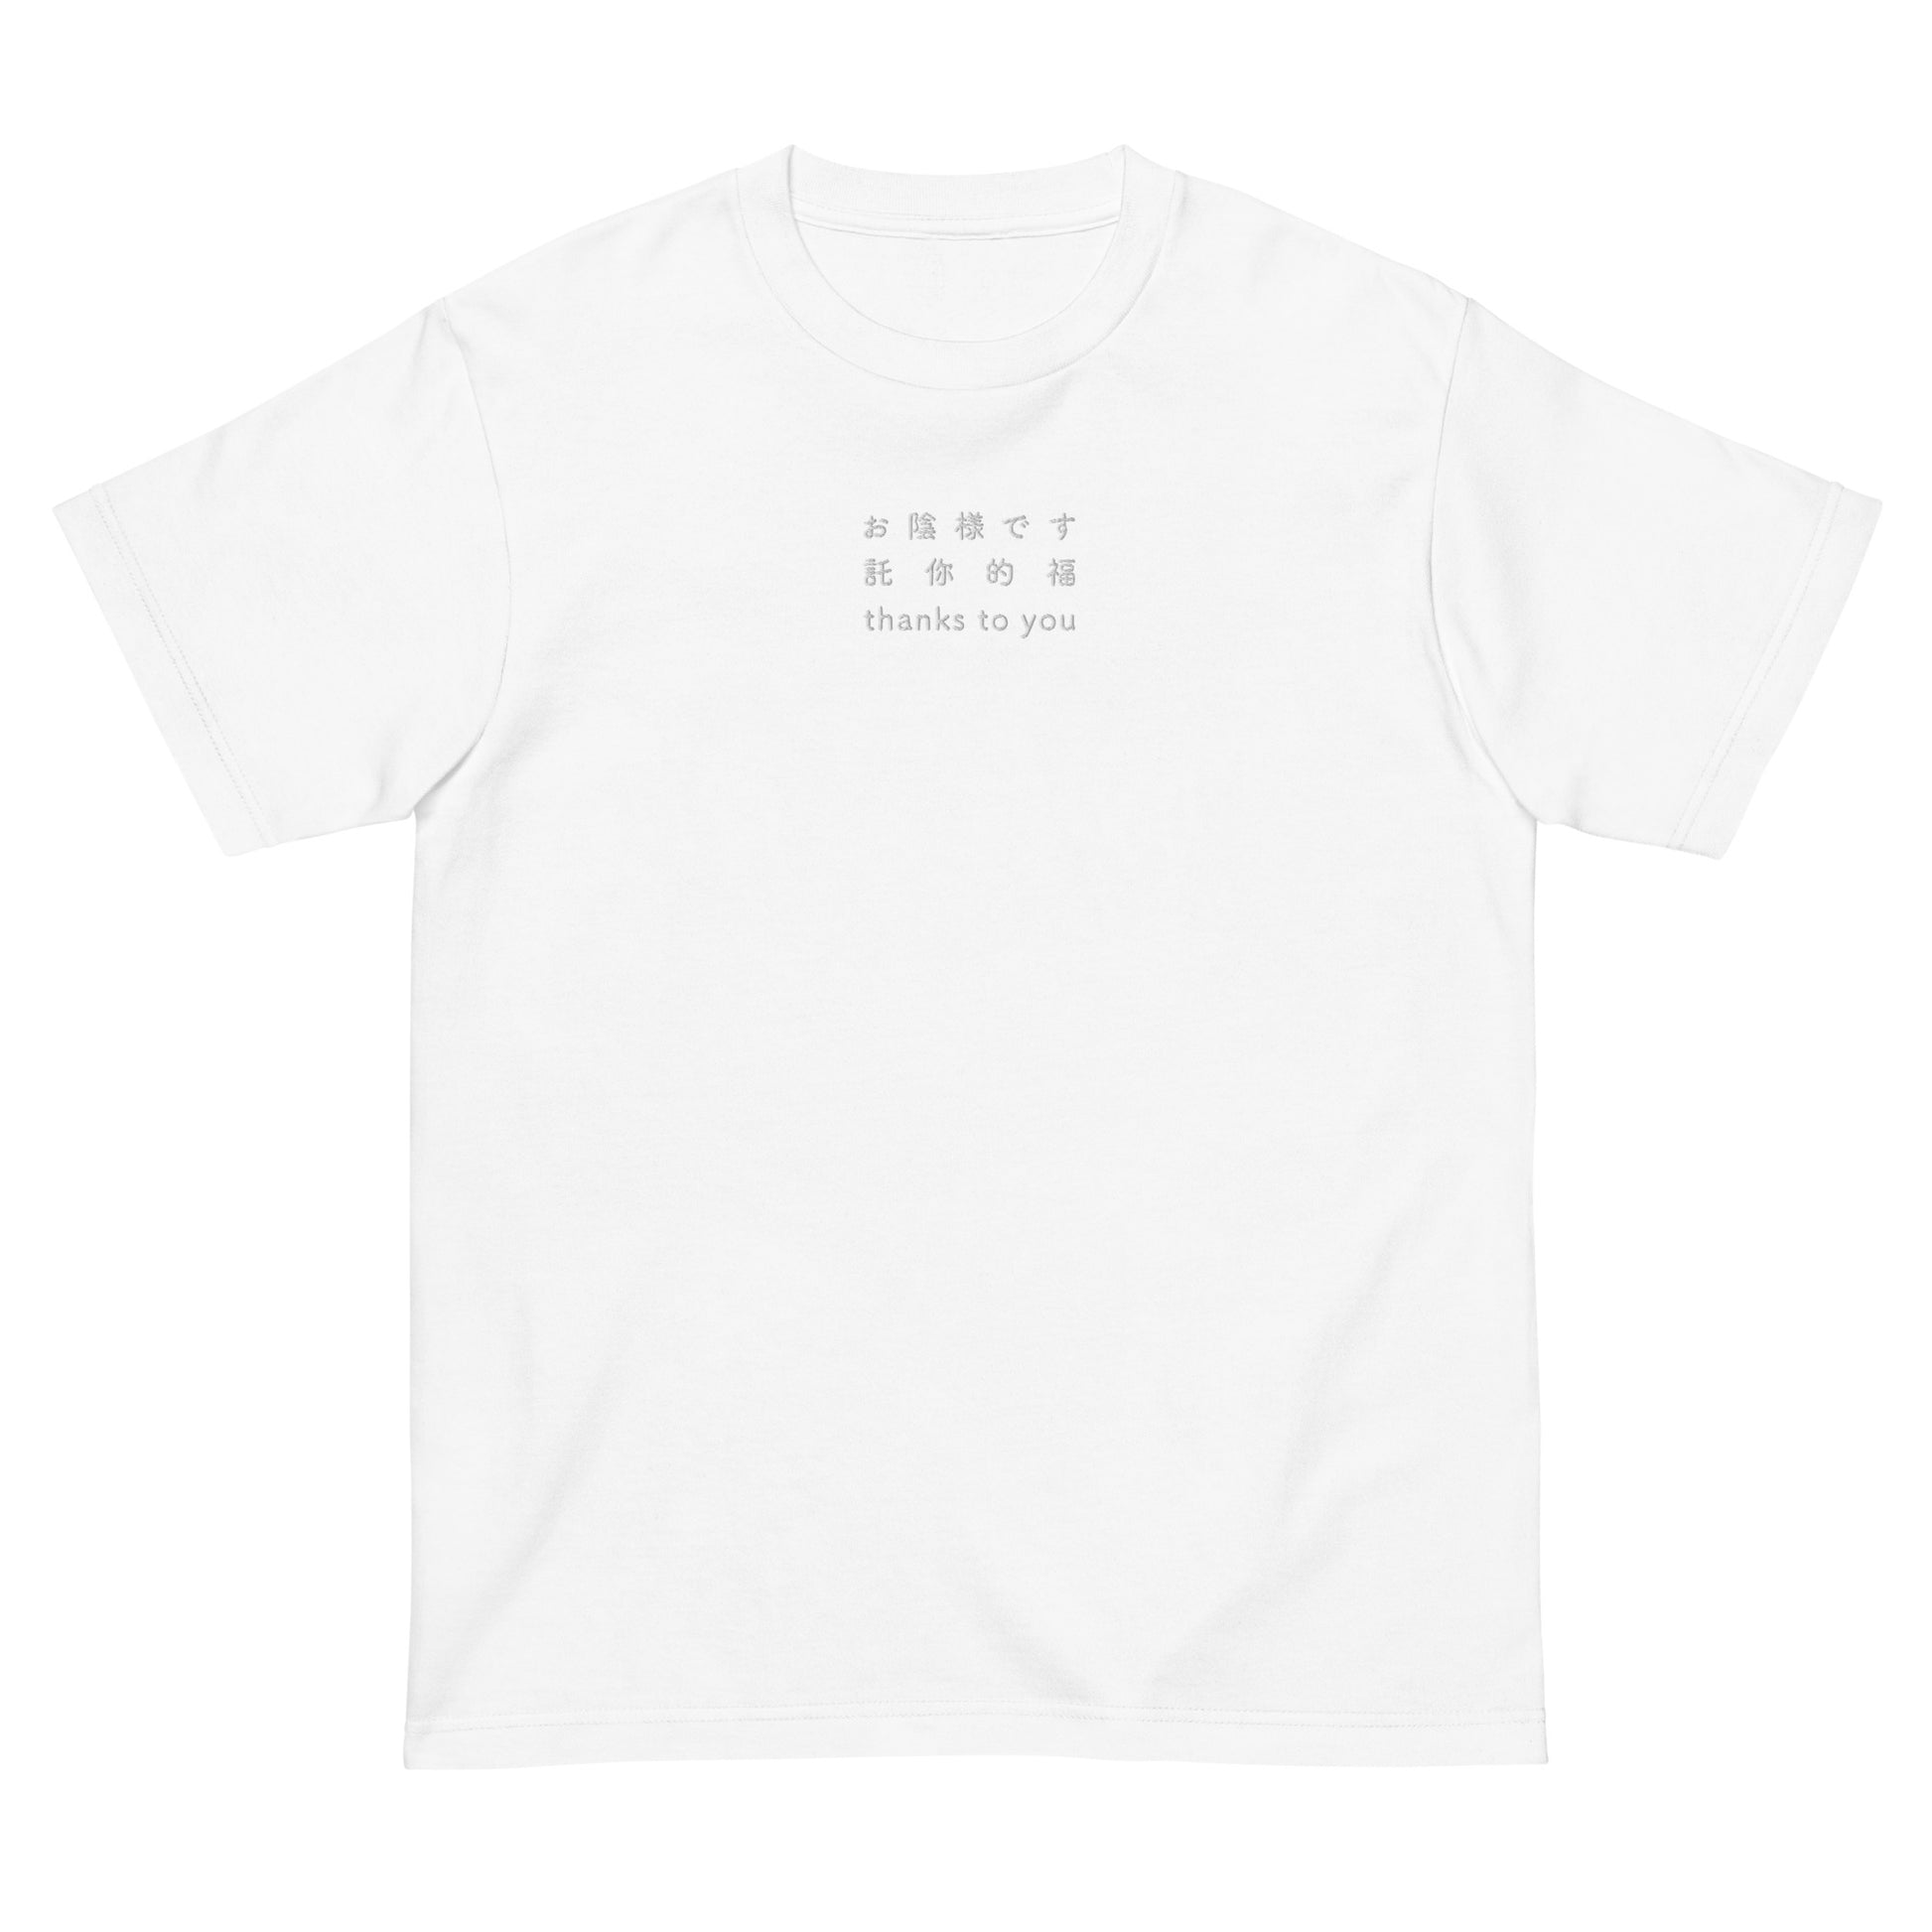 White High Quality Tee - Front Design with an white Embroidery "thanks to you" in Japanese,Chinese and English